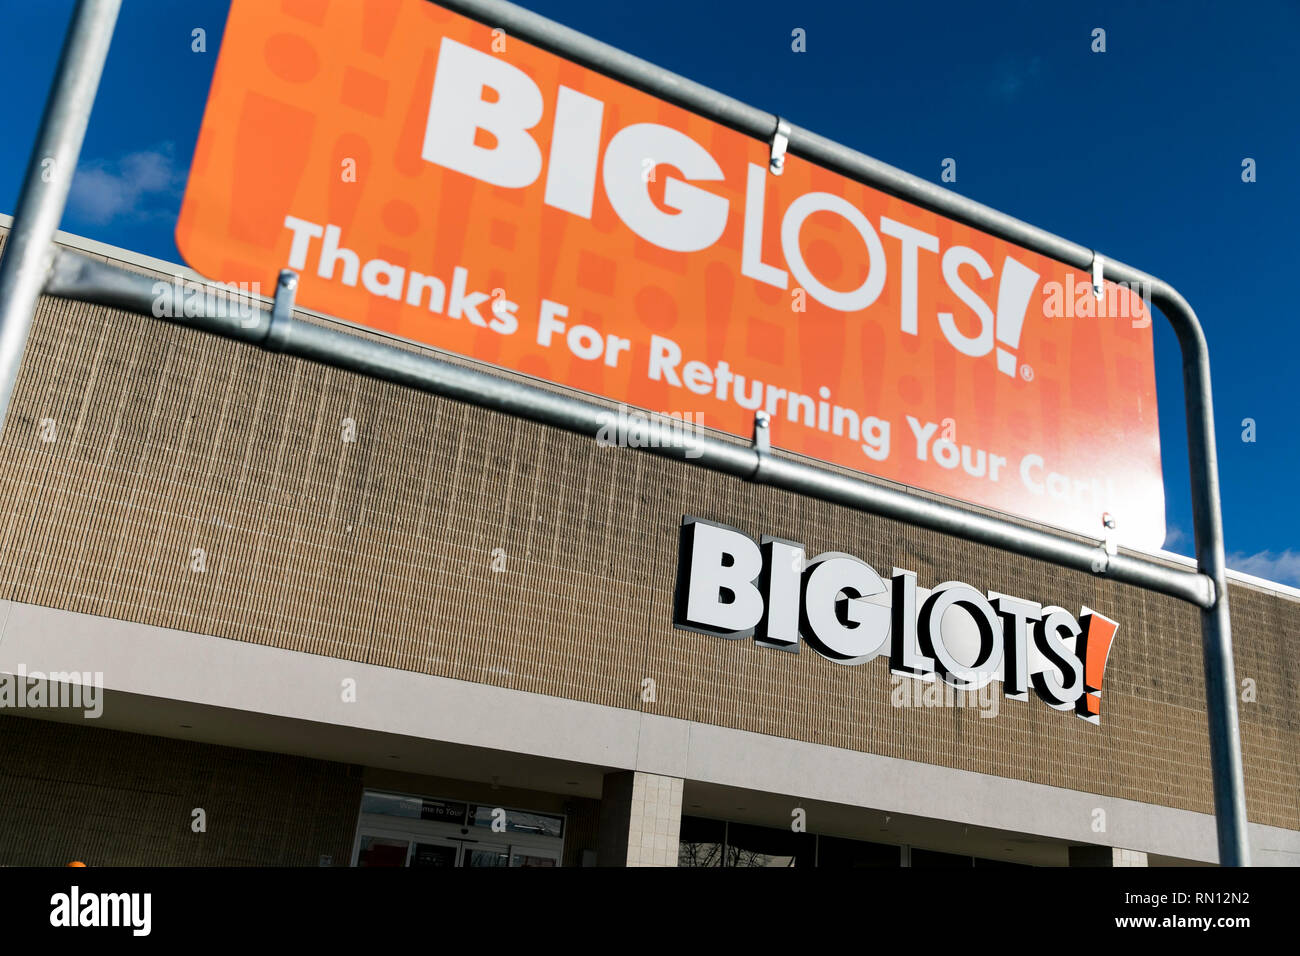 A logo sign outside of a Big Lots retail store location in Harrisburg, Pennsylvania on February 9, 2019. Stock Photo